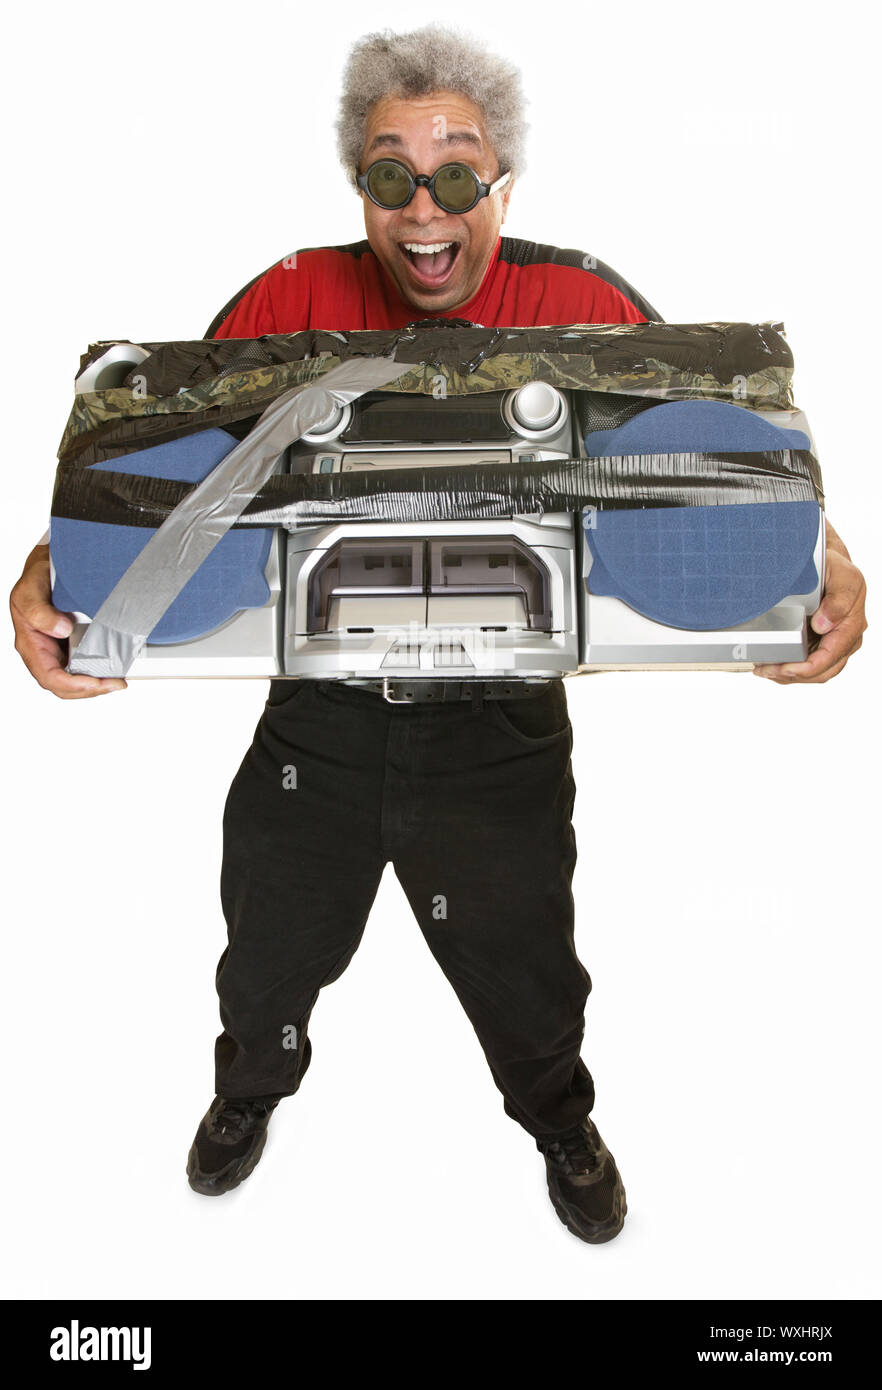 Giddy middle aged man carrying taped boom box Stock Photo